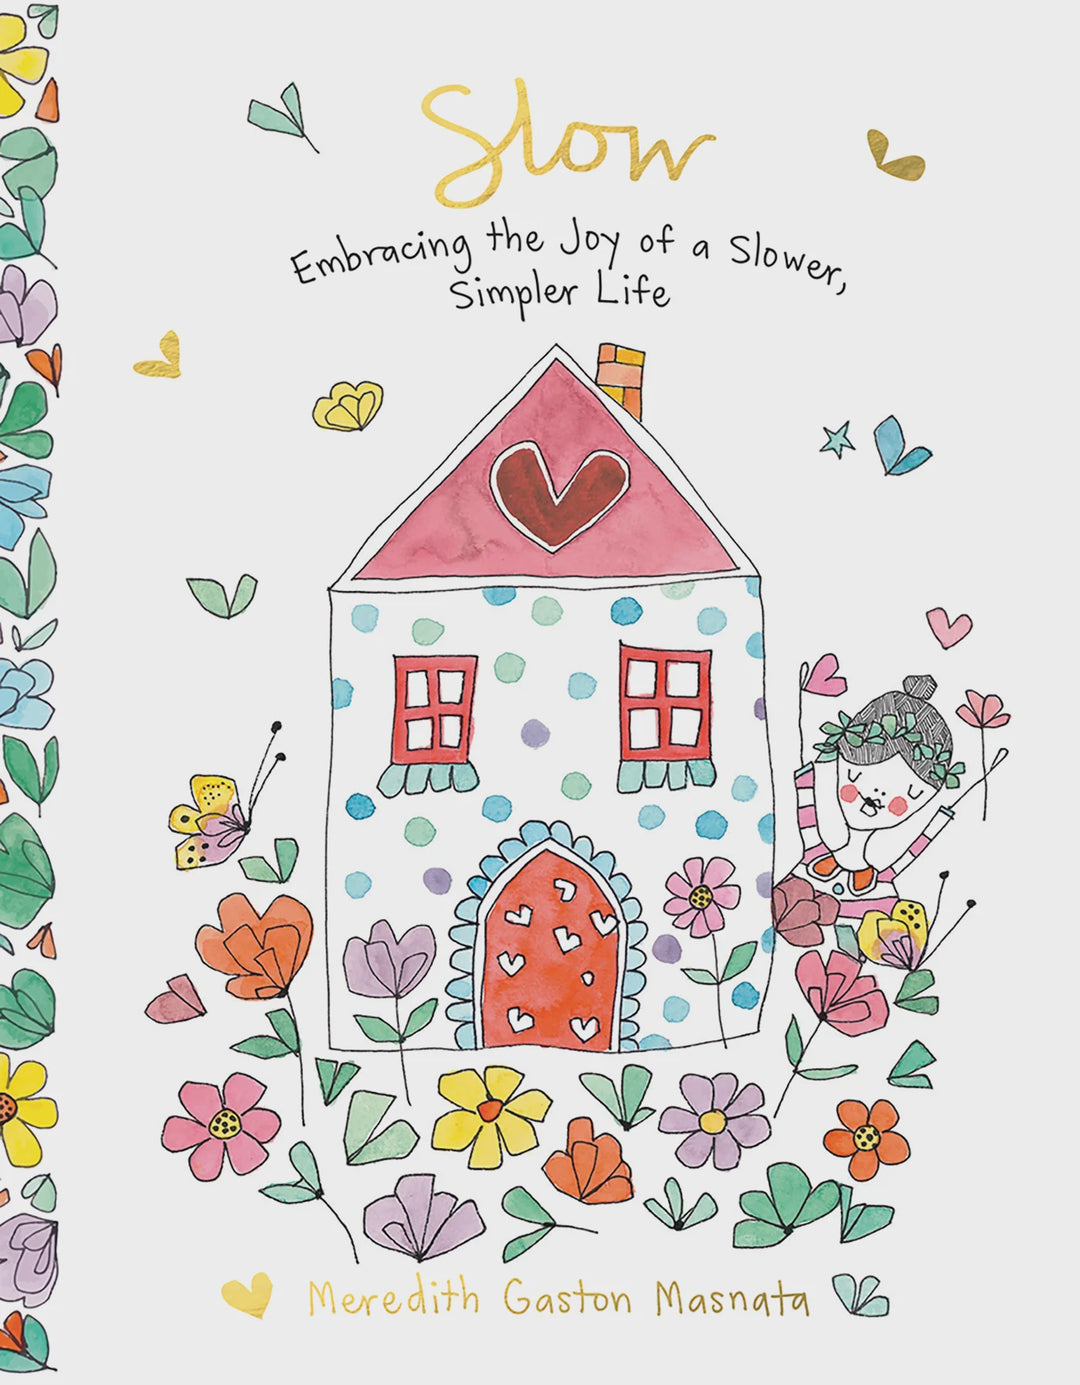 Book - Slow, Embracing the Joy of a Slower, Simpler Life